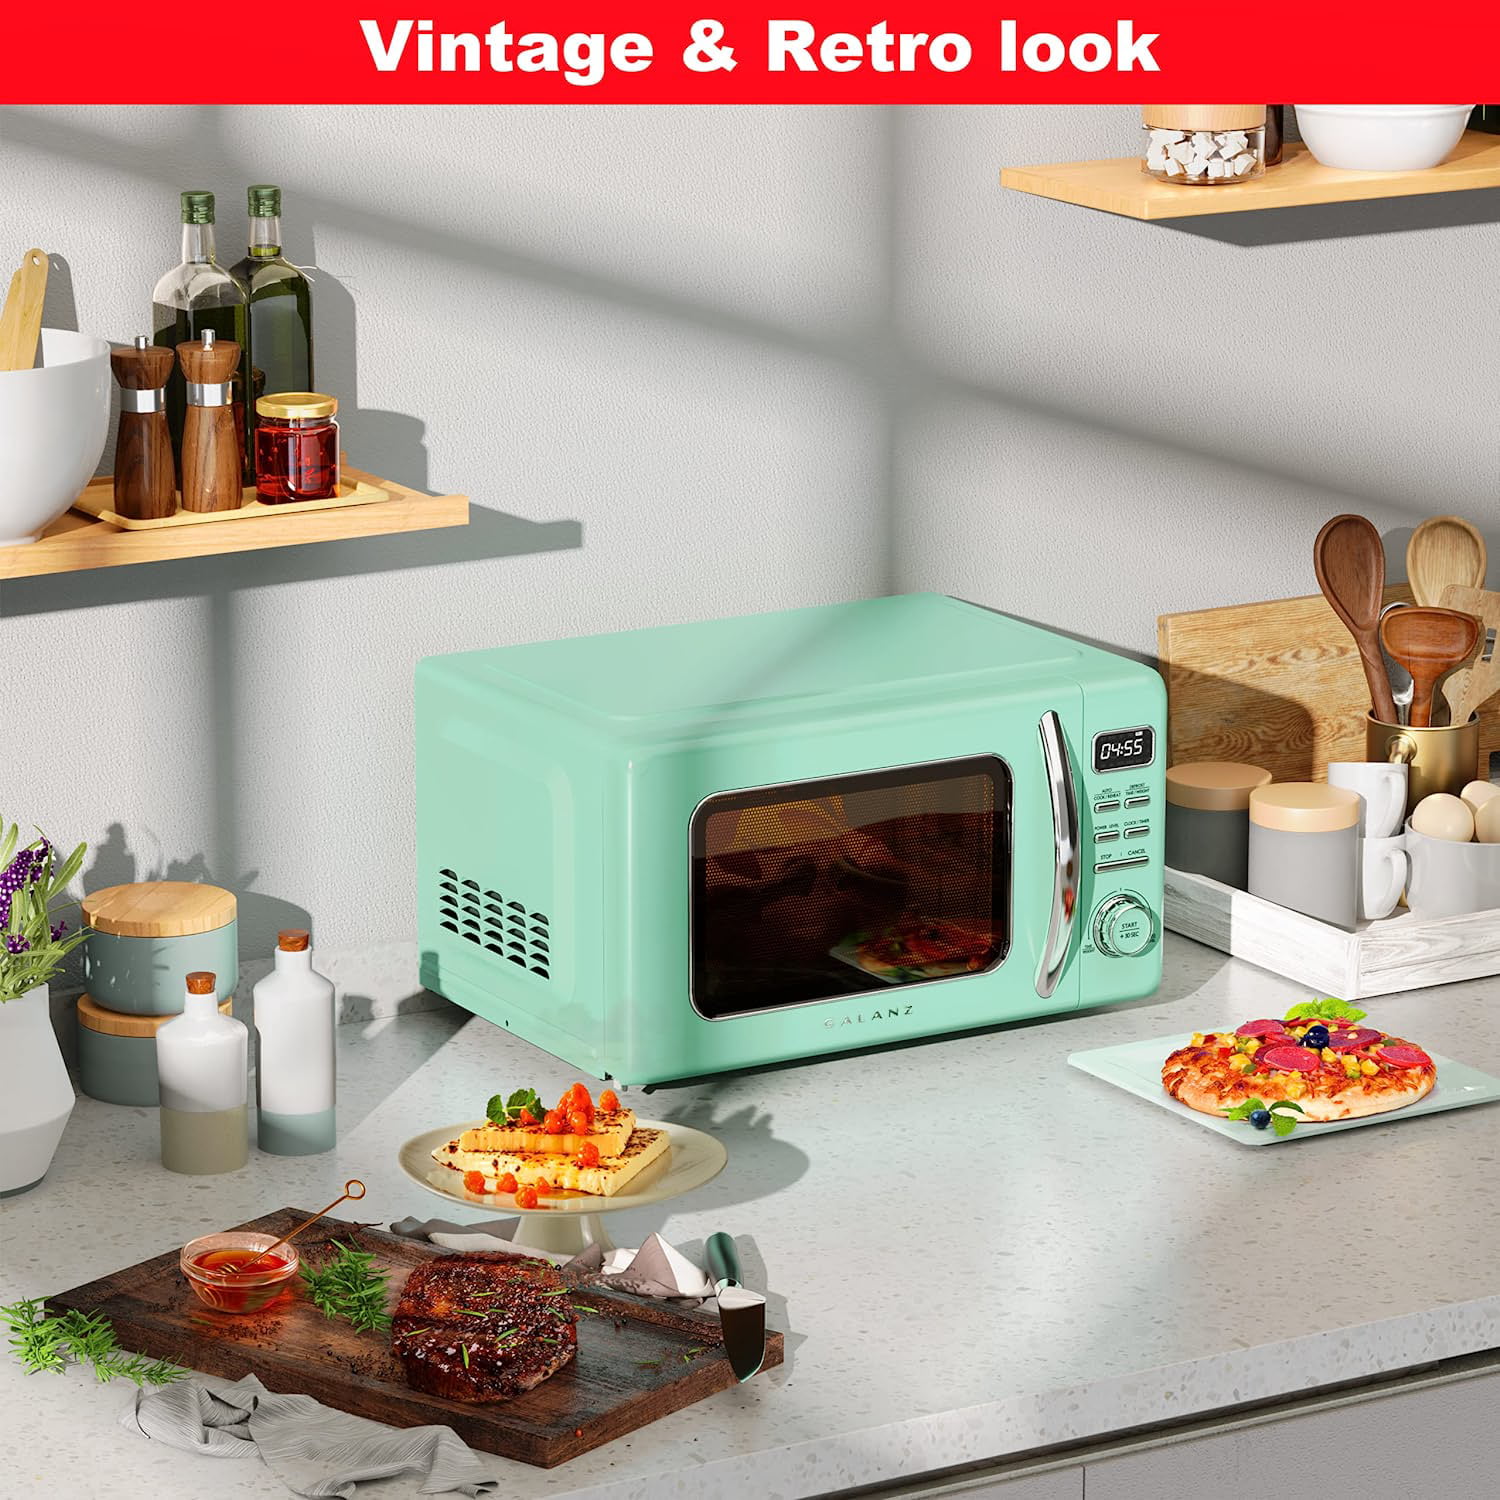 COMFEE' CM-M091AGN Retro Microwave with Multi-stage Cooking, Green